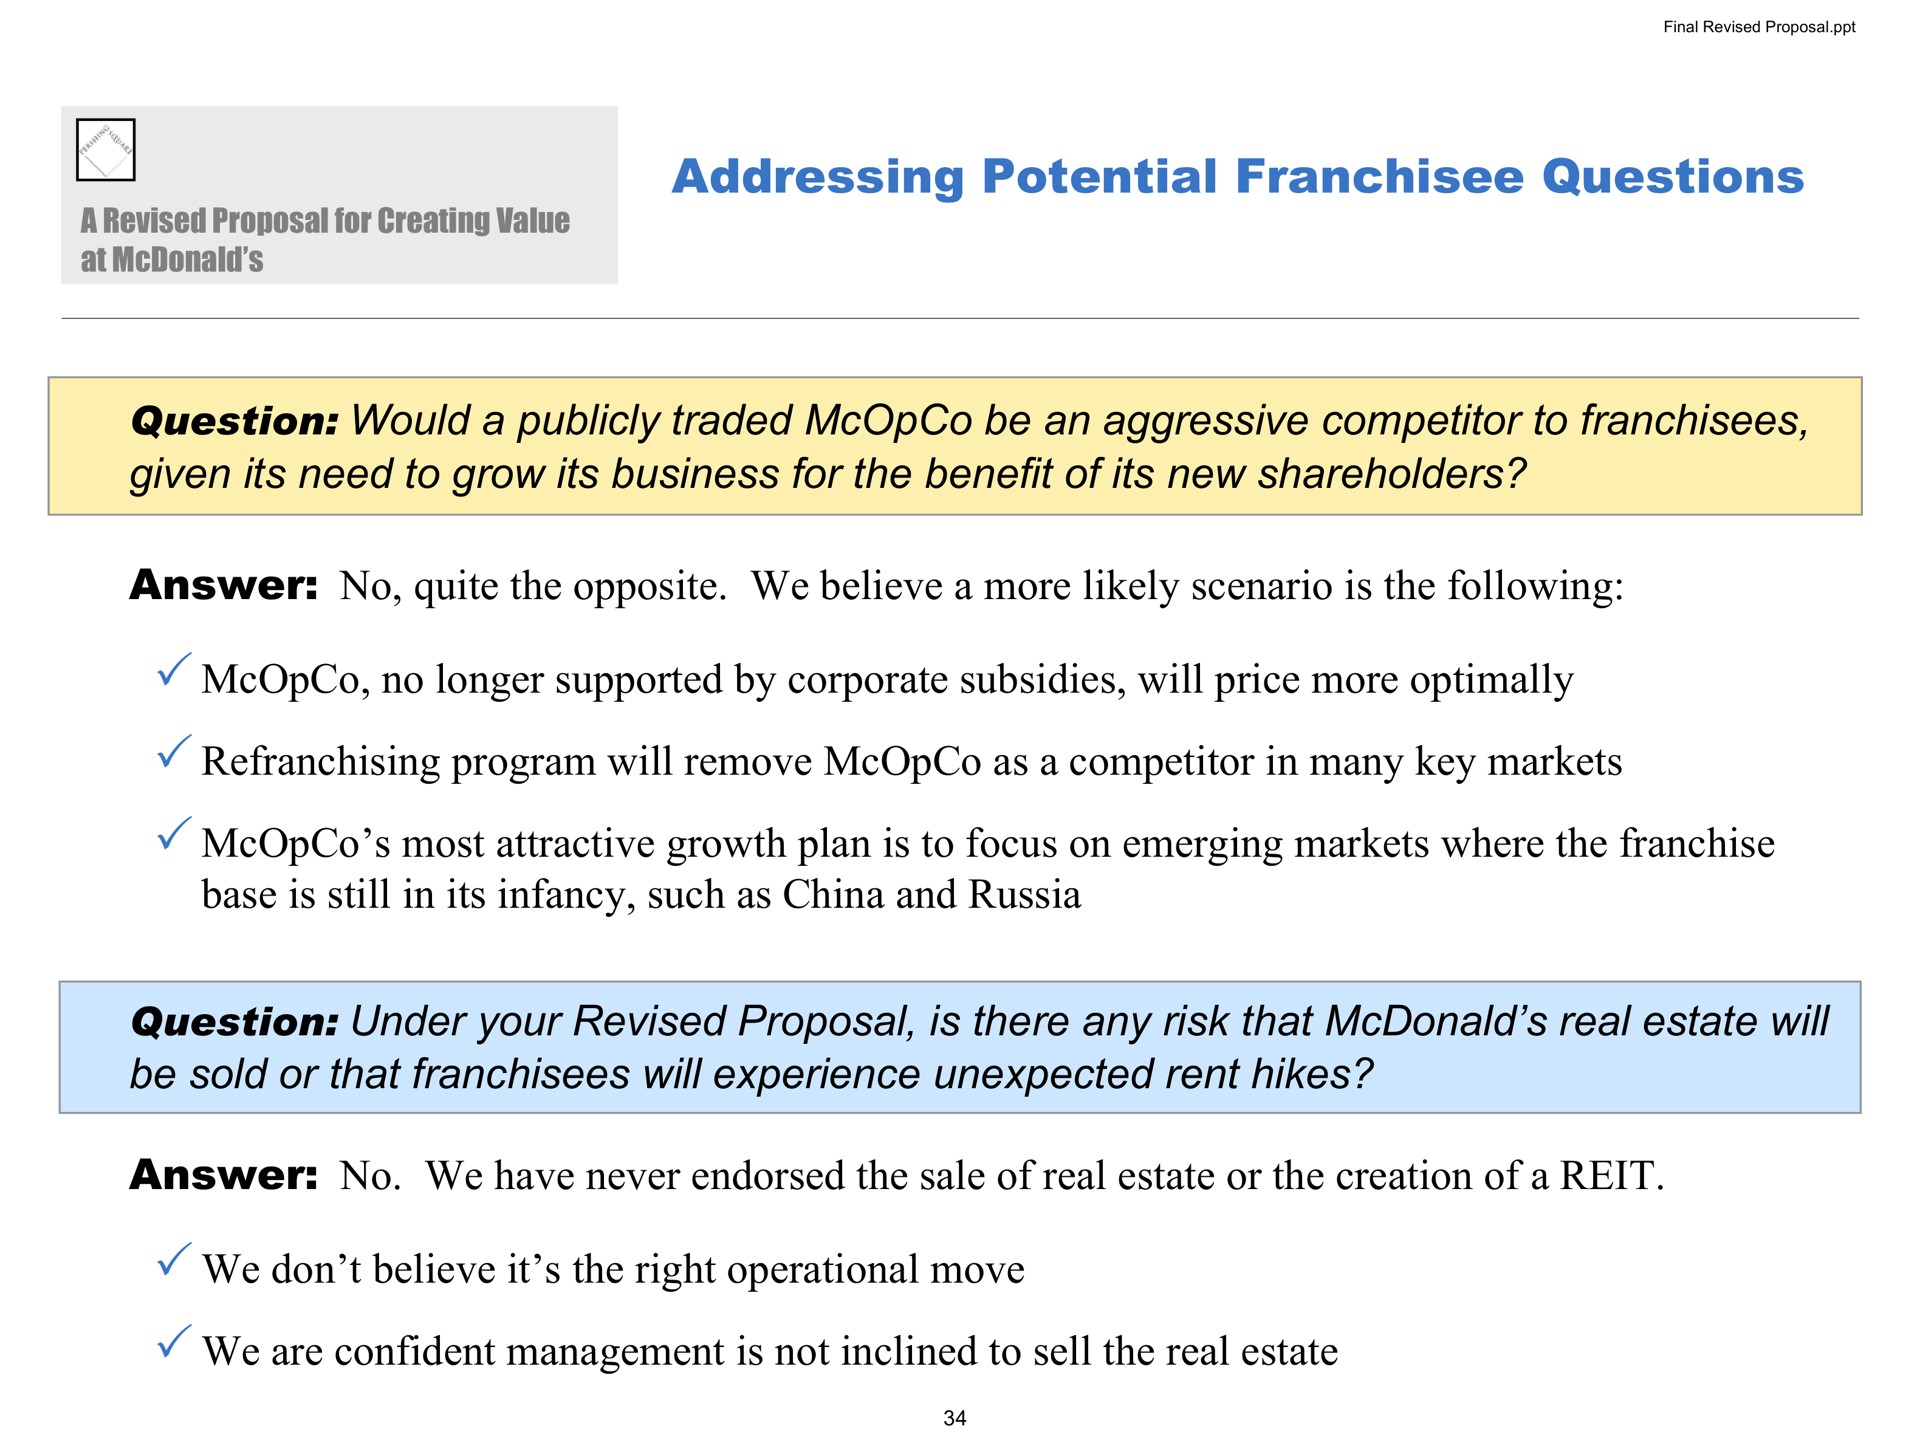 addressing potential questions question would a publicly traded be an aggressive competitor to franchisees given its need to grow its business for the benefit of its new shareholders answer no quite the opposite we believe a more likely scenario is the following no longer supported by corporate subsidies will price more program will remove as a competitor in many key markets most attractive growth plan is to focus on emerging markets where the franchise base is still in its infancy such as china and russia question under your revised proposal is there any risk that real estate will be sold or that franchisees will experience unexpected rent hikes answer no we have never endorsed the sale of real estate or the creation of a reit we don believe it the right operational move we are confident management is not inclined to sell the real estate | Pershing Square